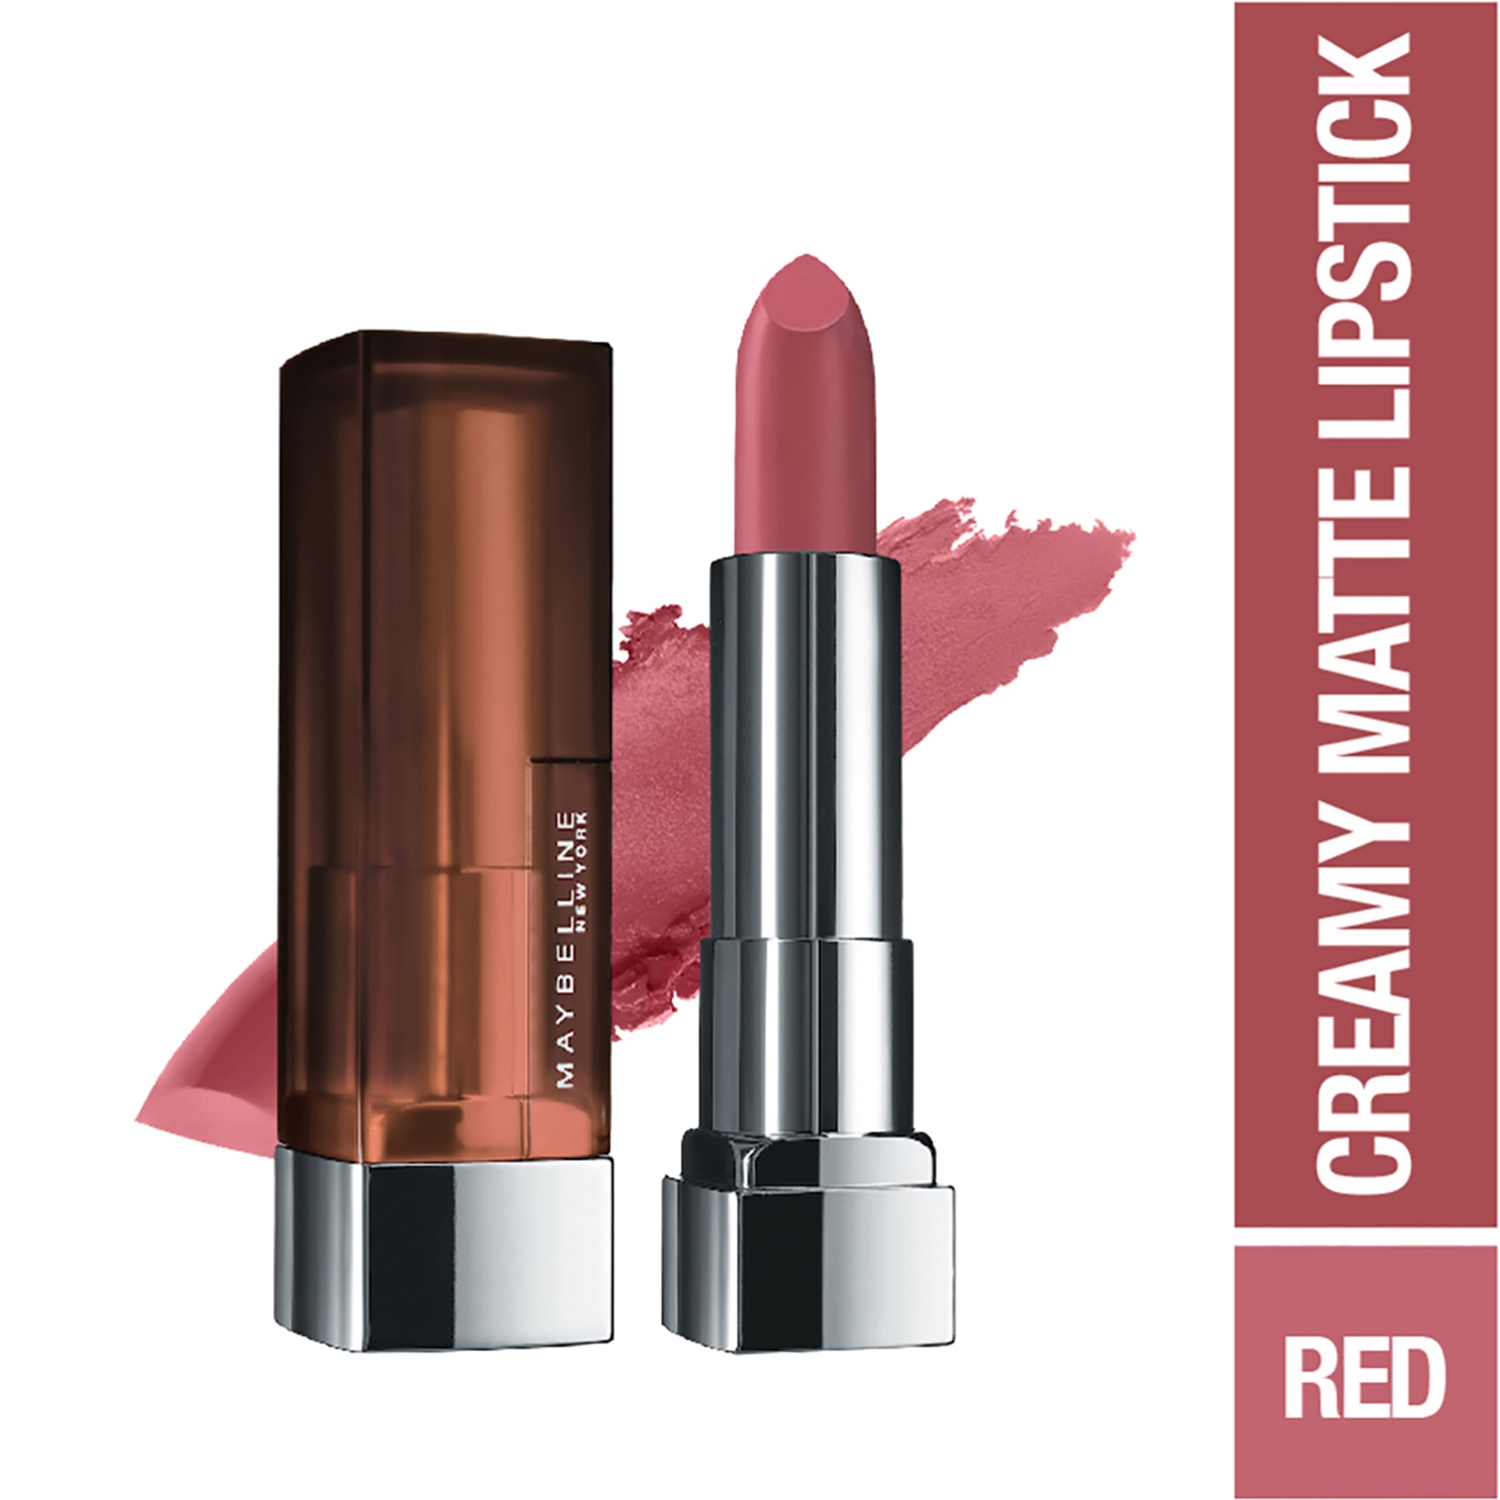 Maybelline New York | Maybelline New York Color Sensational Creamy Matte Lipstick - 660 Touch Of Spice (3.9g)